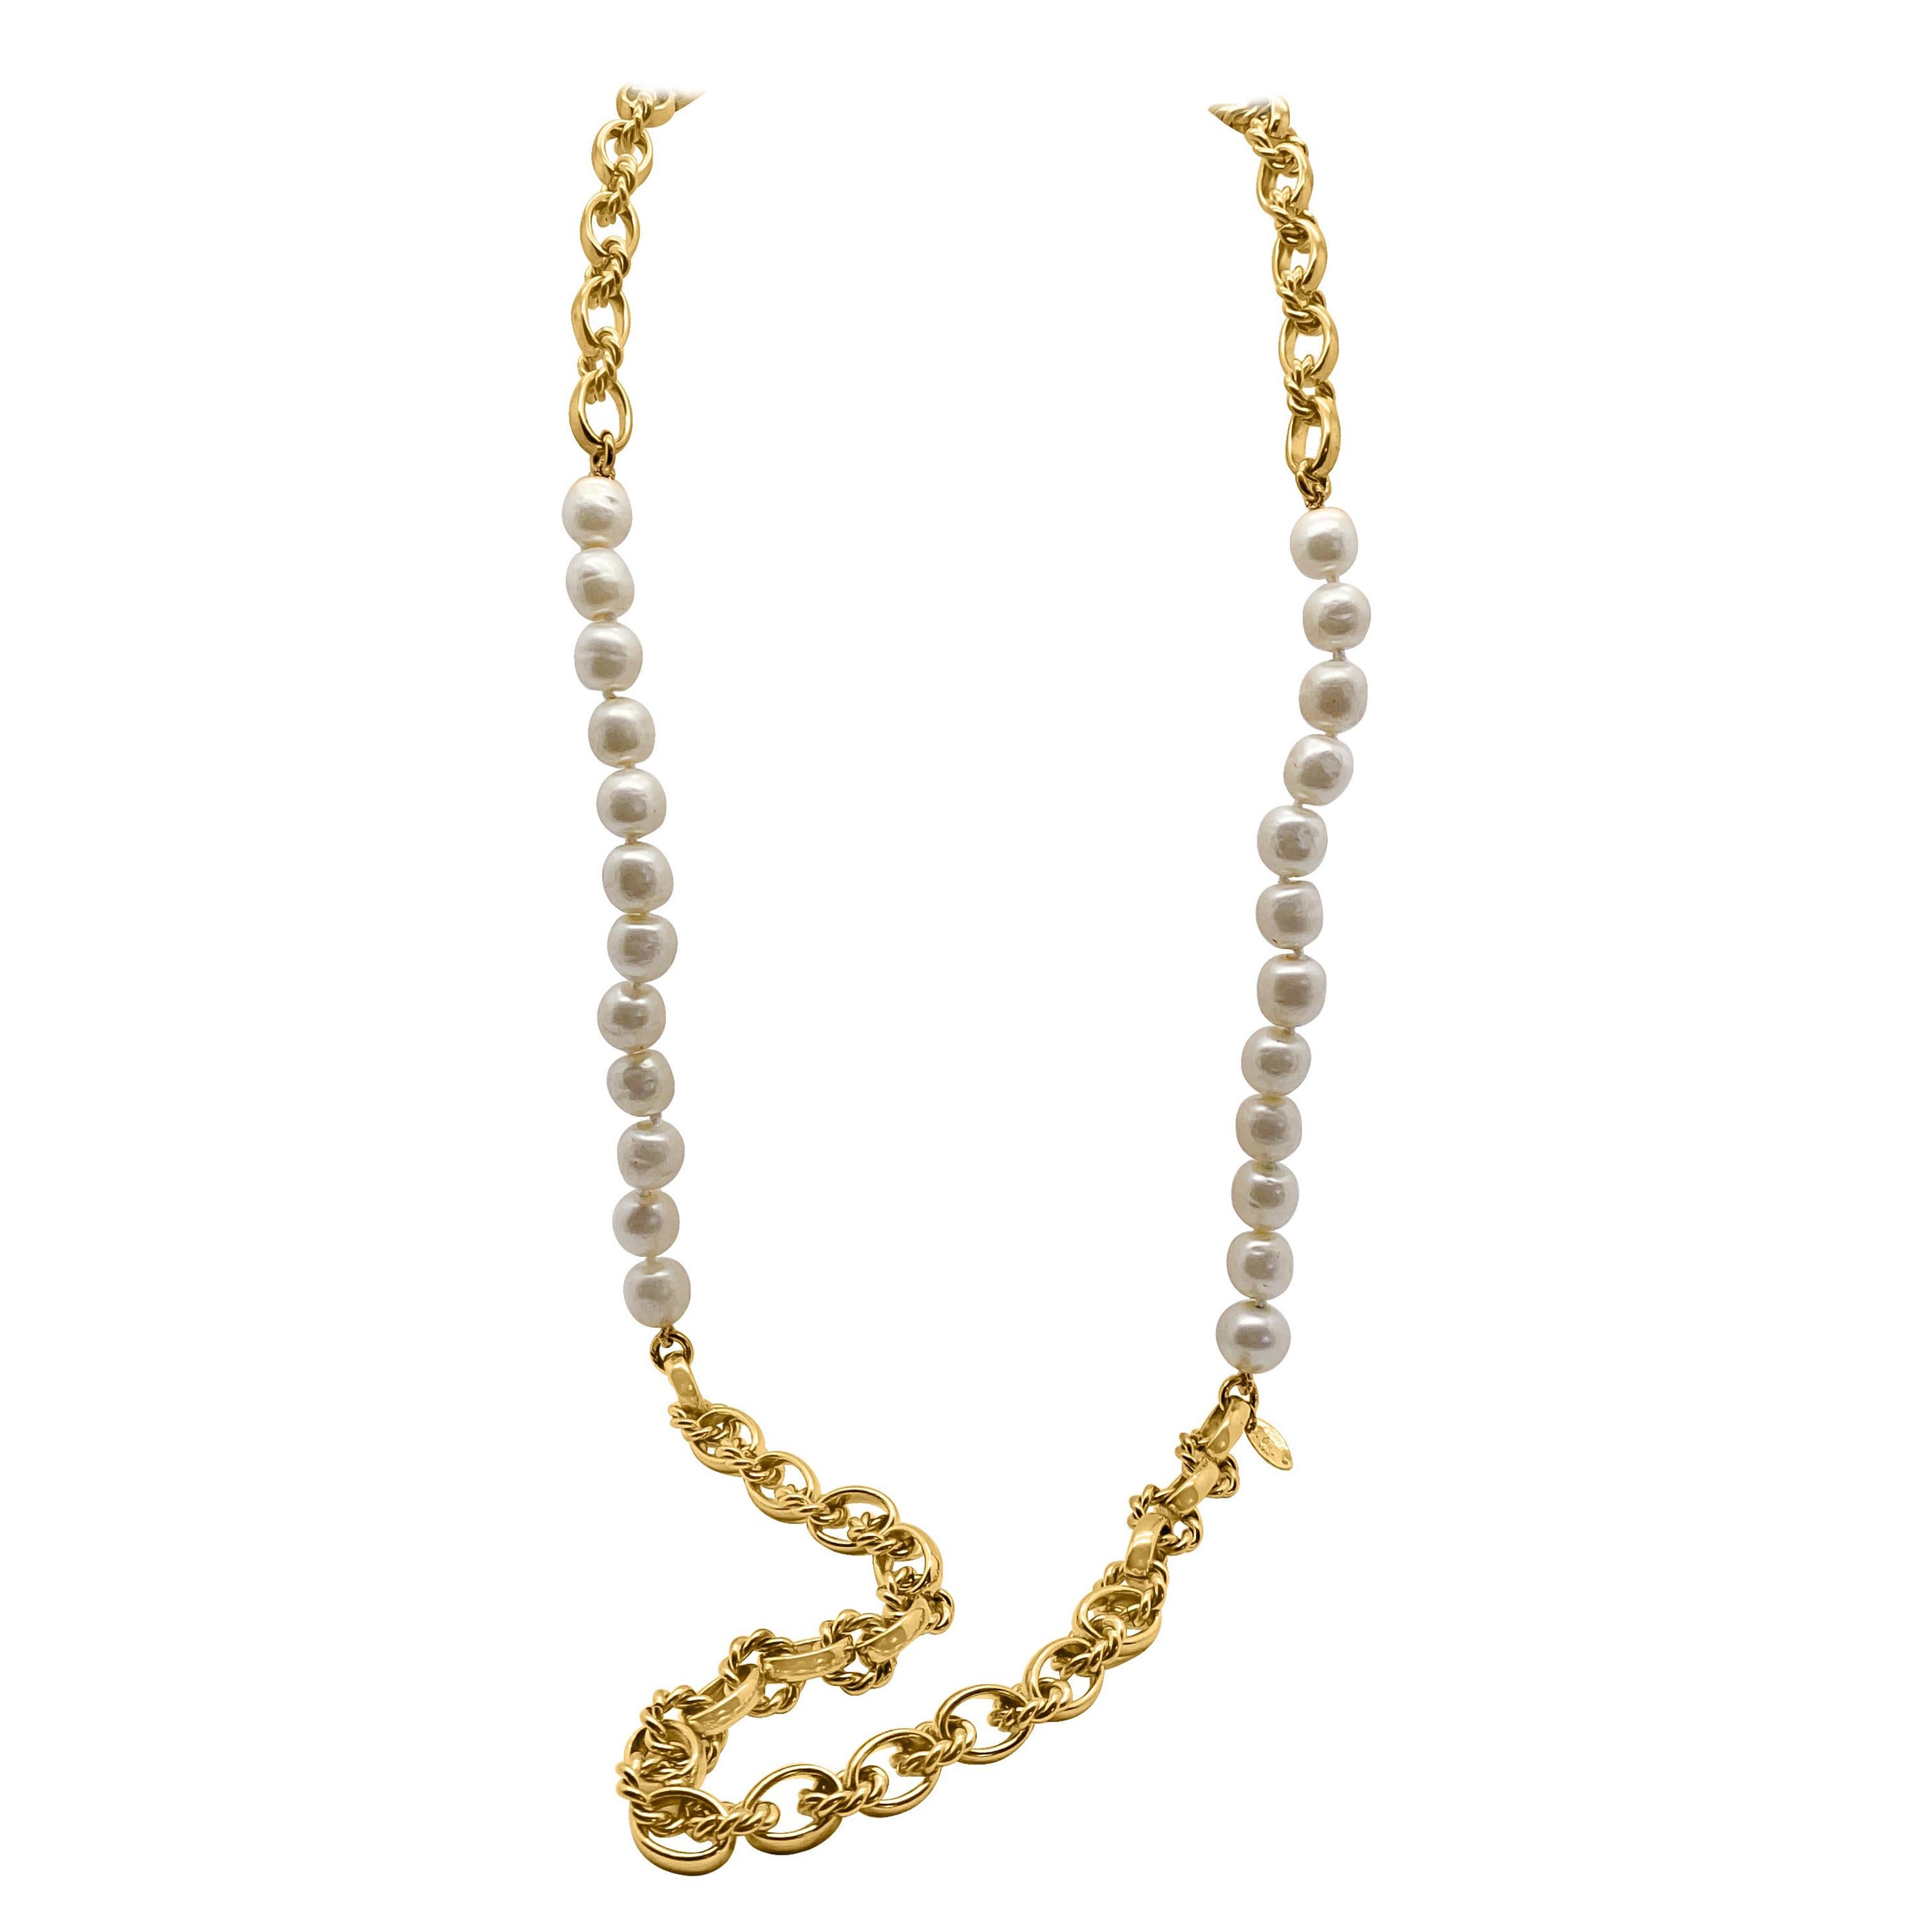 Vintage Chanel Baroque Pearl & Chunky Chain Necklace 1980s